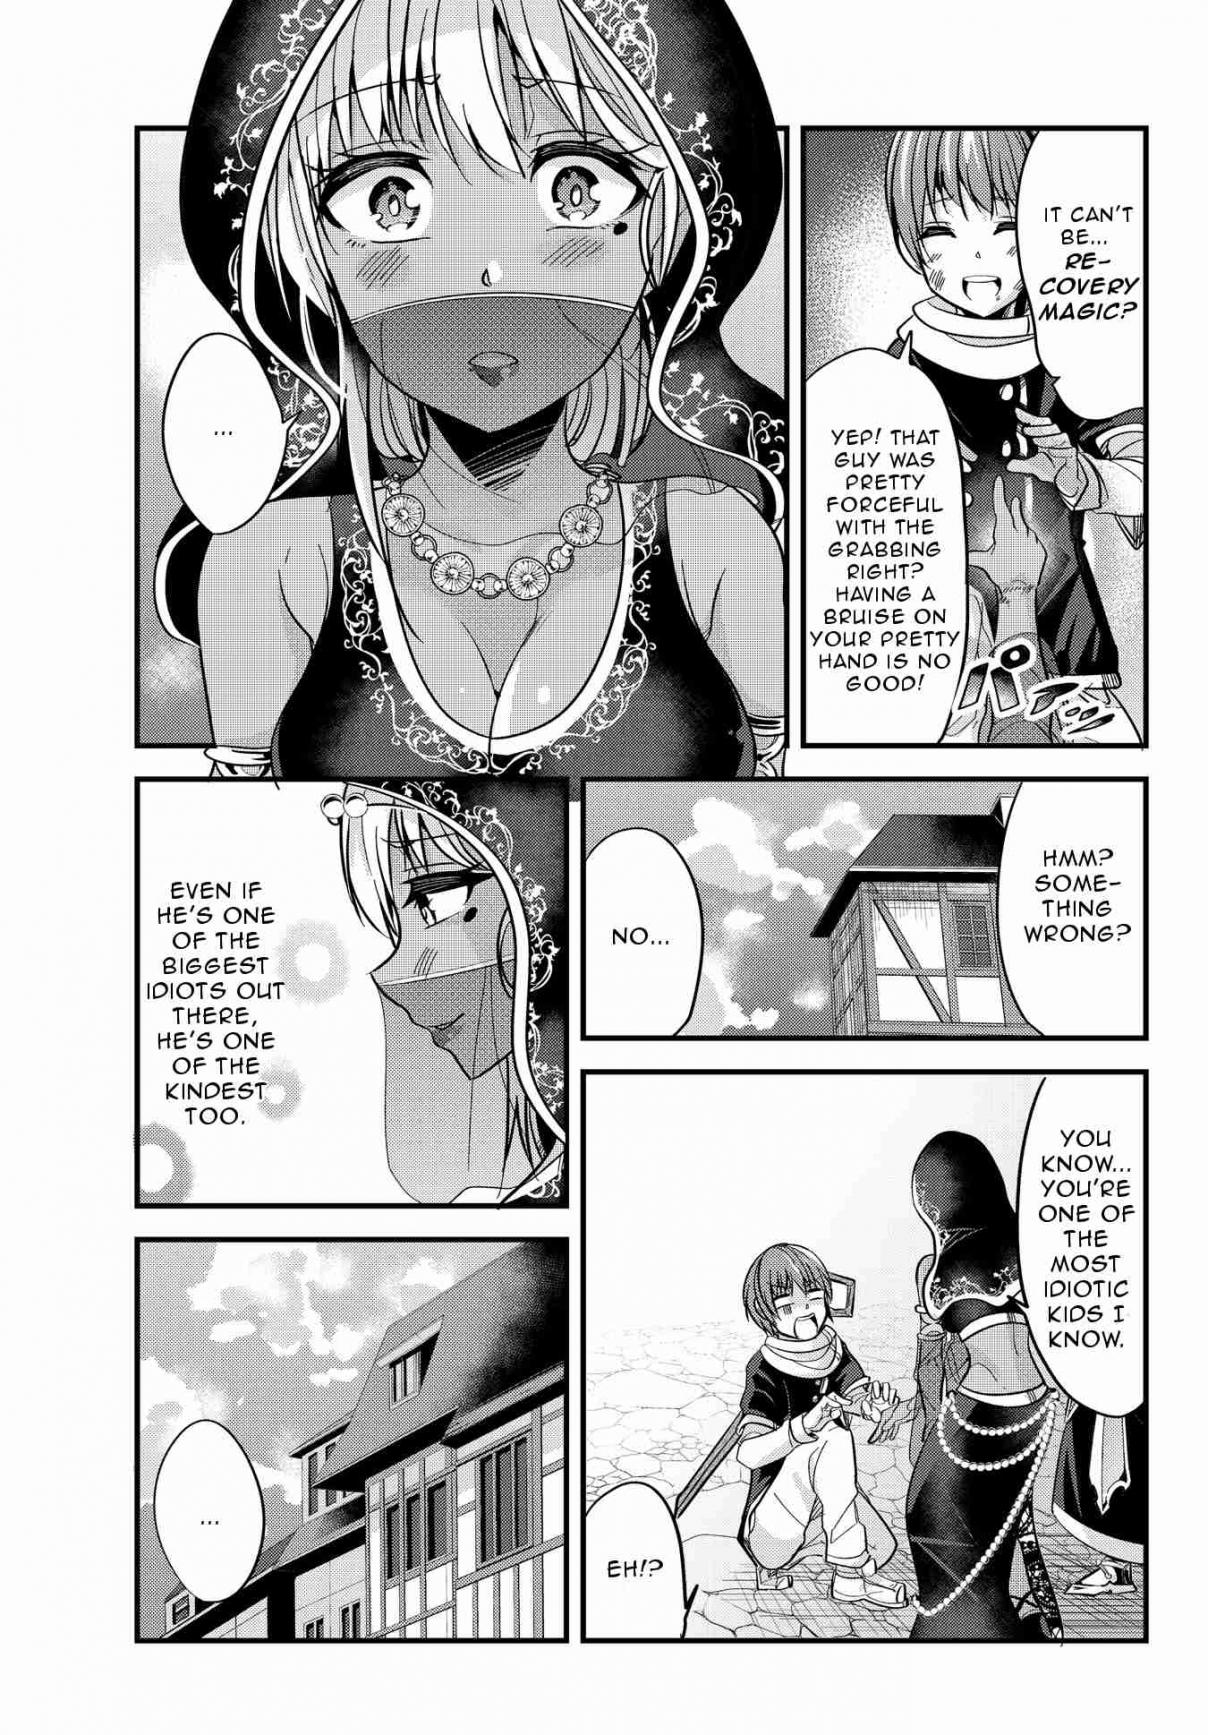 A Story About Treating a Female Knight, Who Has Never Been Treated as a Woman, as a Woman Ch. 25 The Female Knight, Fooly, and the Fortune Teller